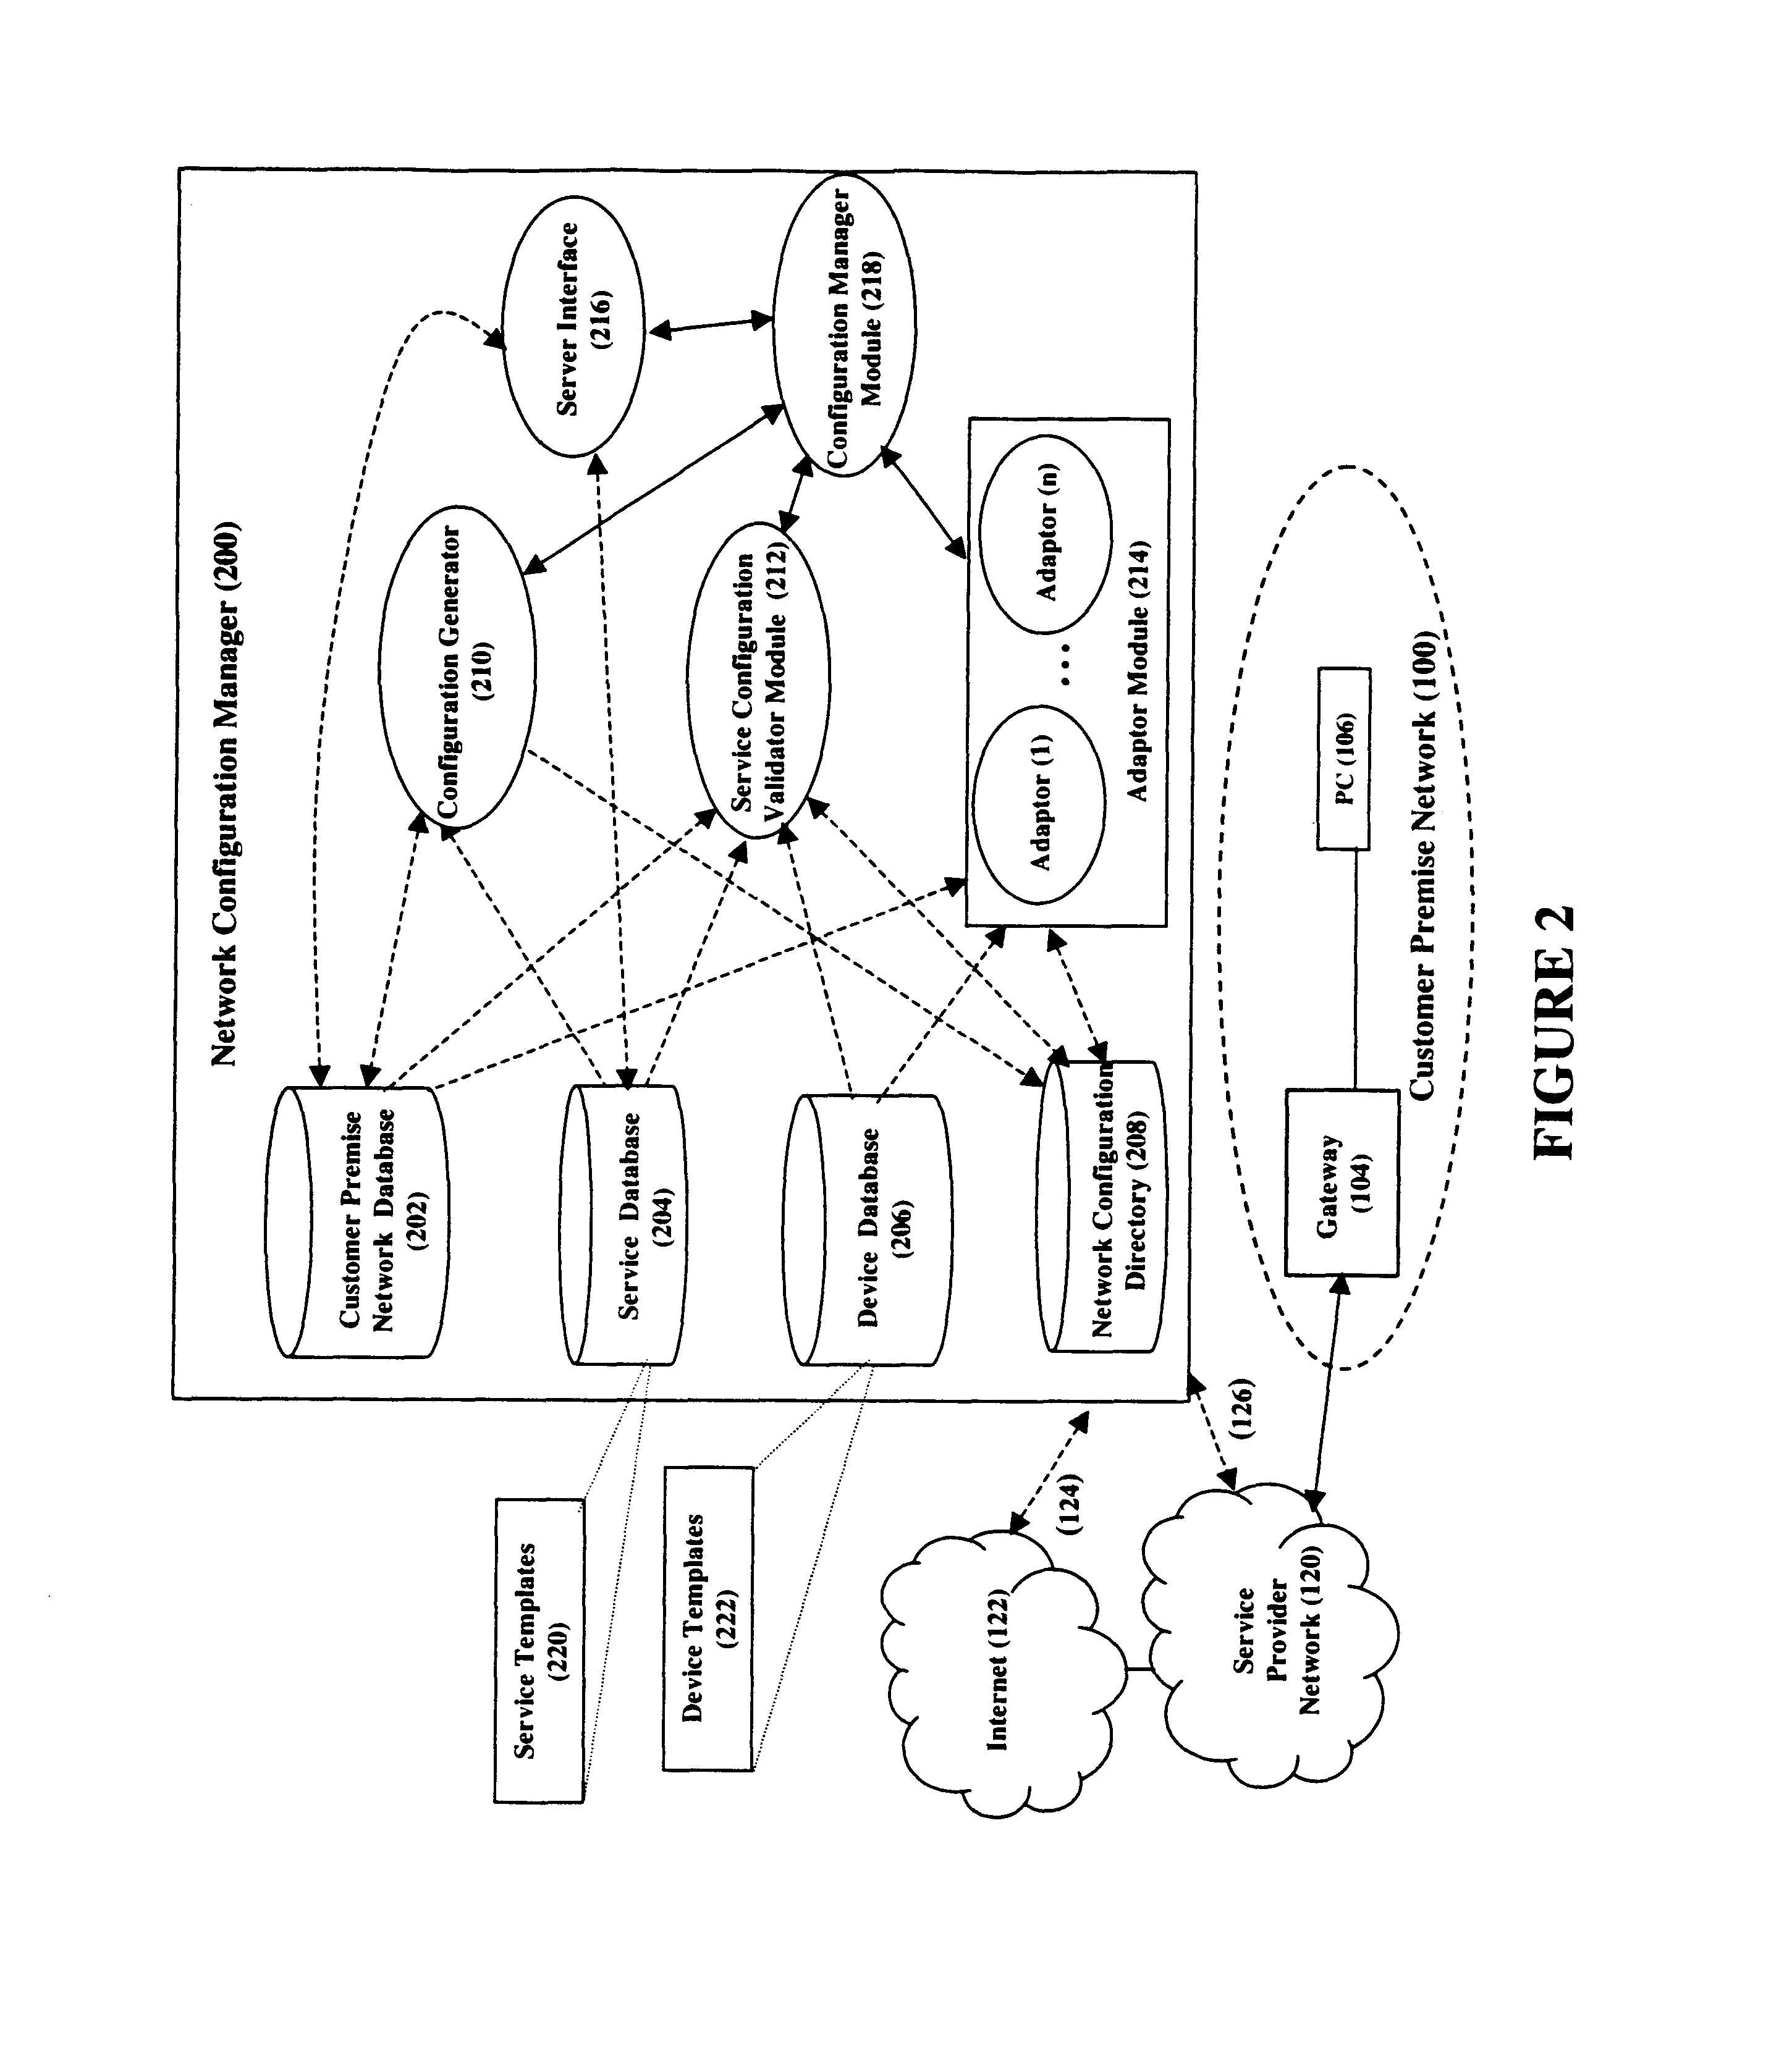 Template based configuration and validation of a network for enabling a requested service to be compatible with the previously enabled services